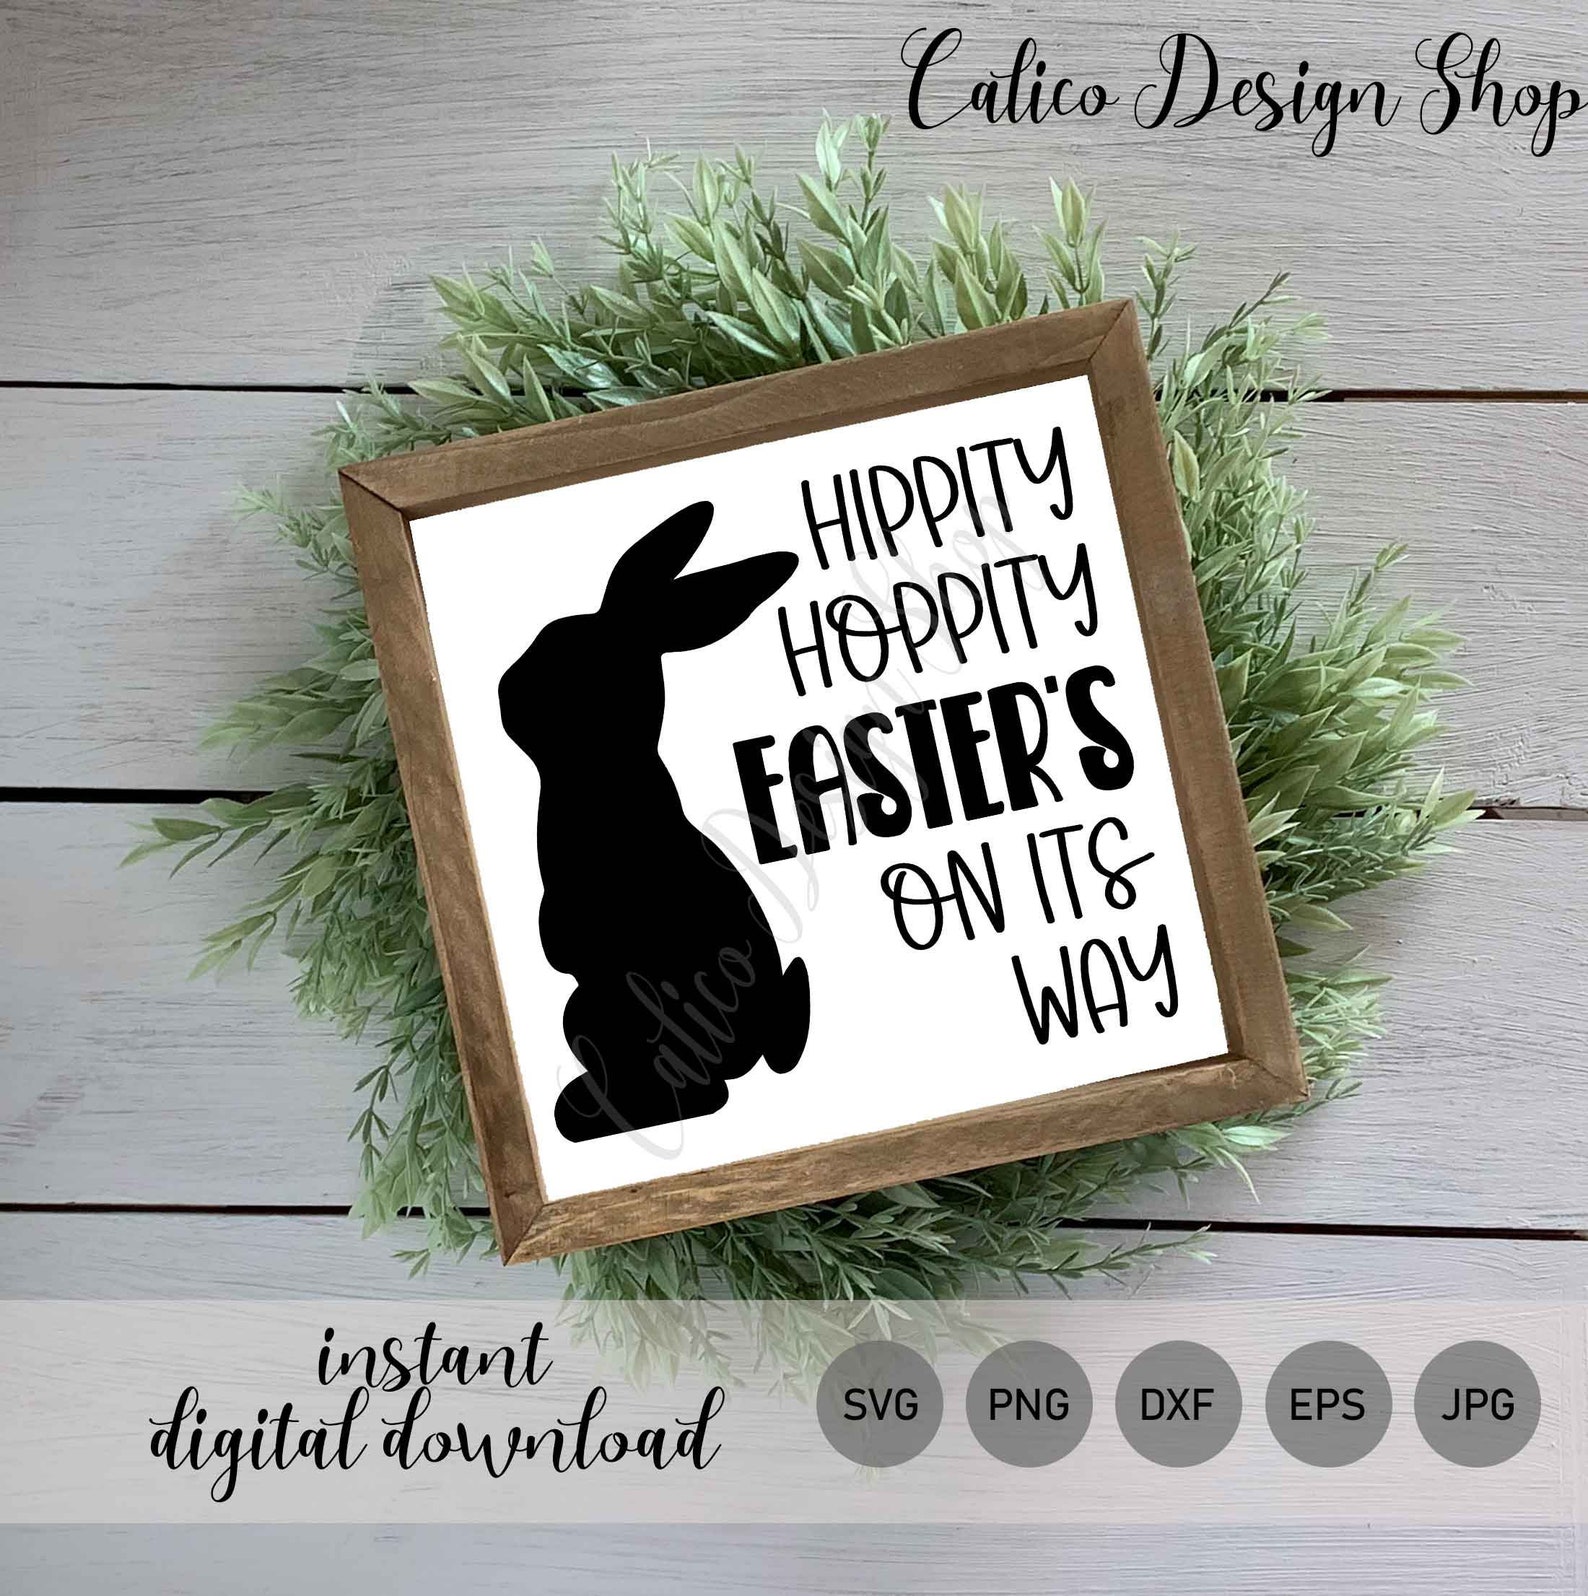 Hippity Hoppity Easter's on Its Way SVG File for Cutting - Etsy